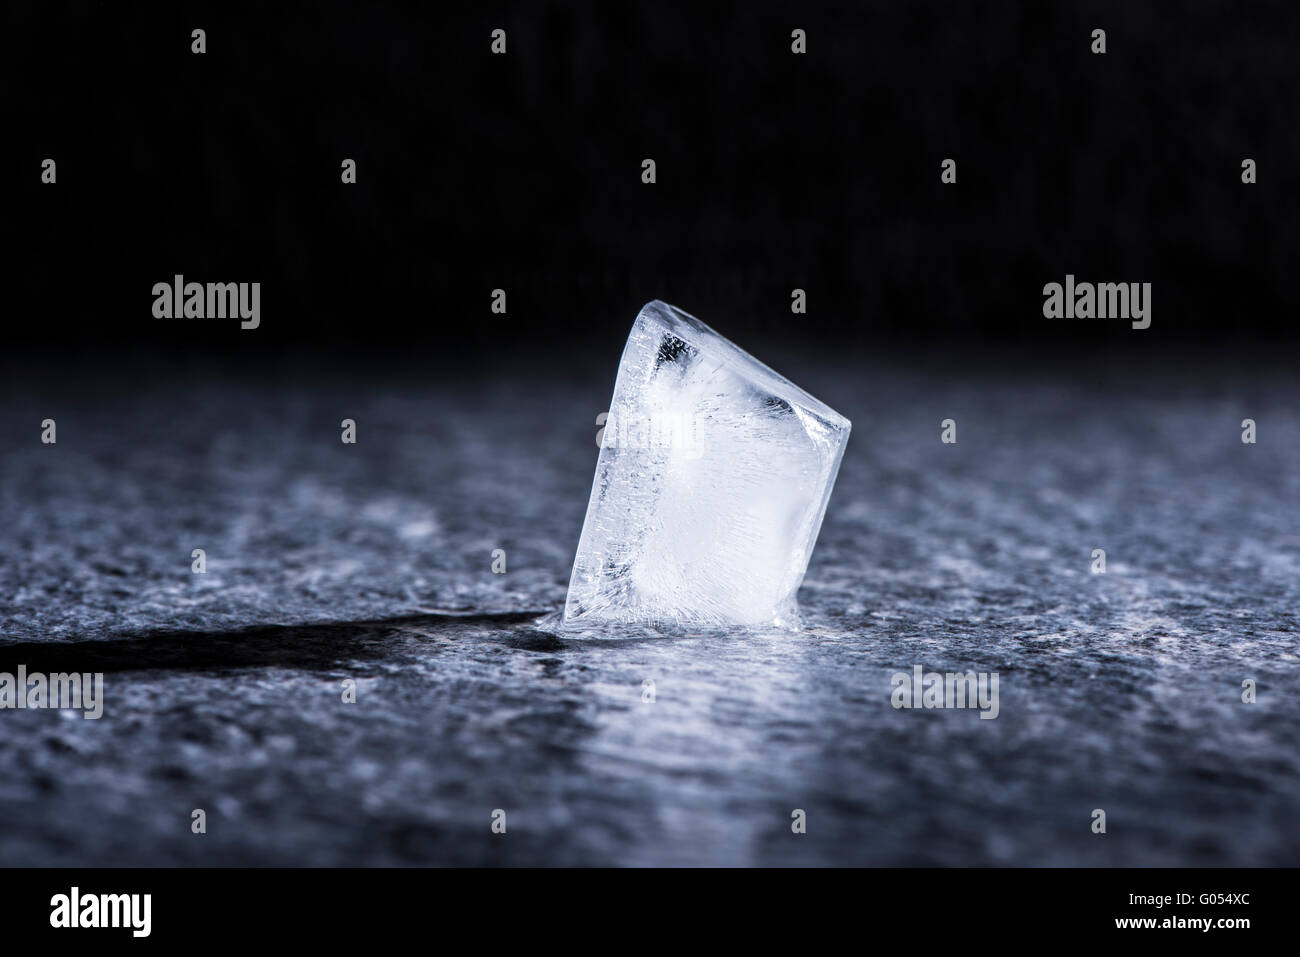 Melting ice cube in close up. Concept of cold temperature, water and change. Stock Photo